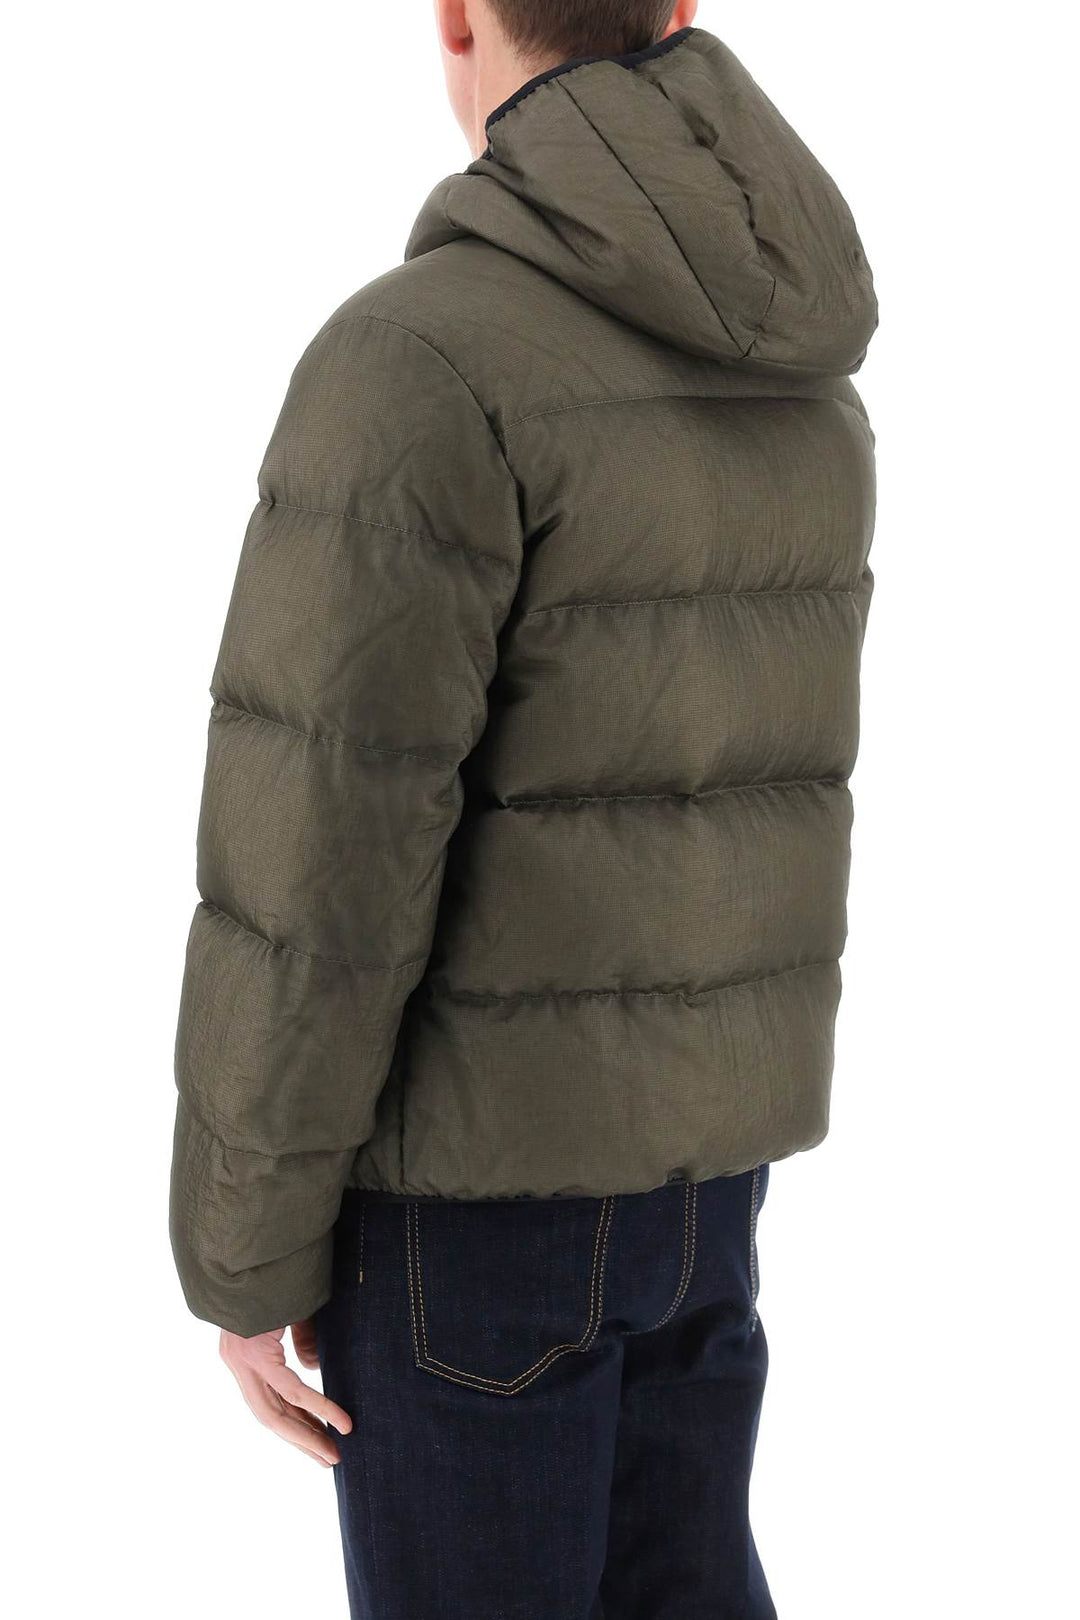 Dsquared2 Ripstop Puffer Jacket   Verde